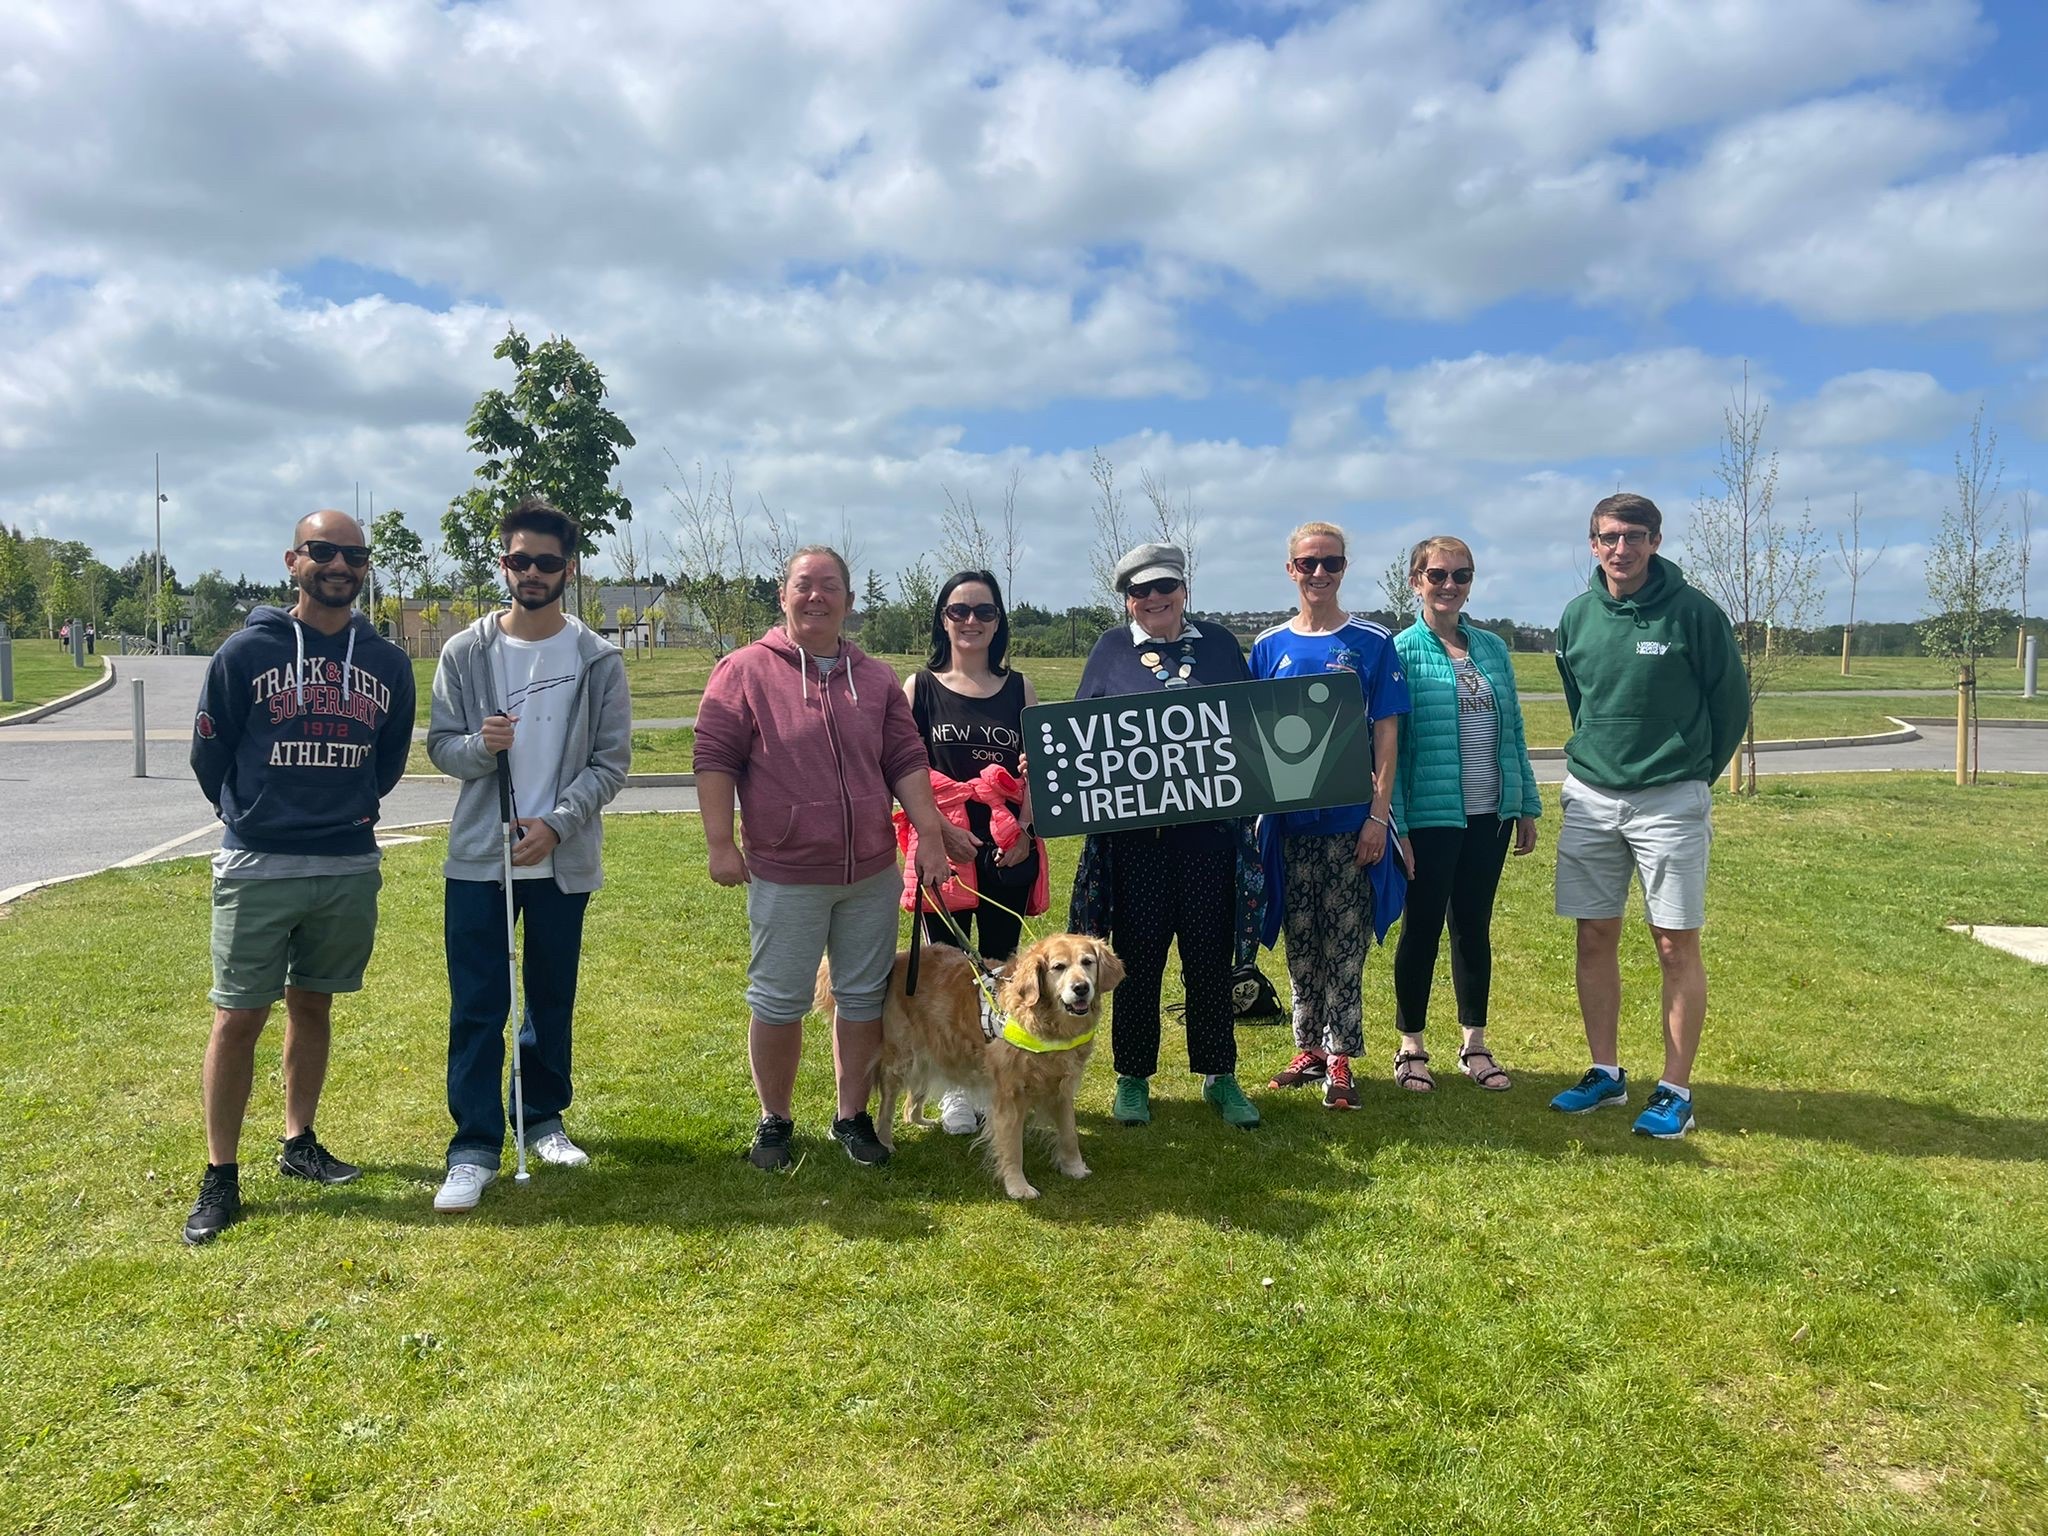 Wexford walking participants standing in a park.